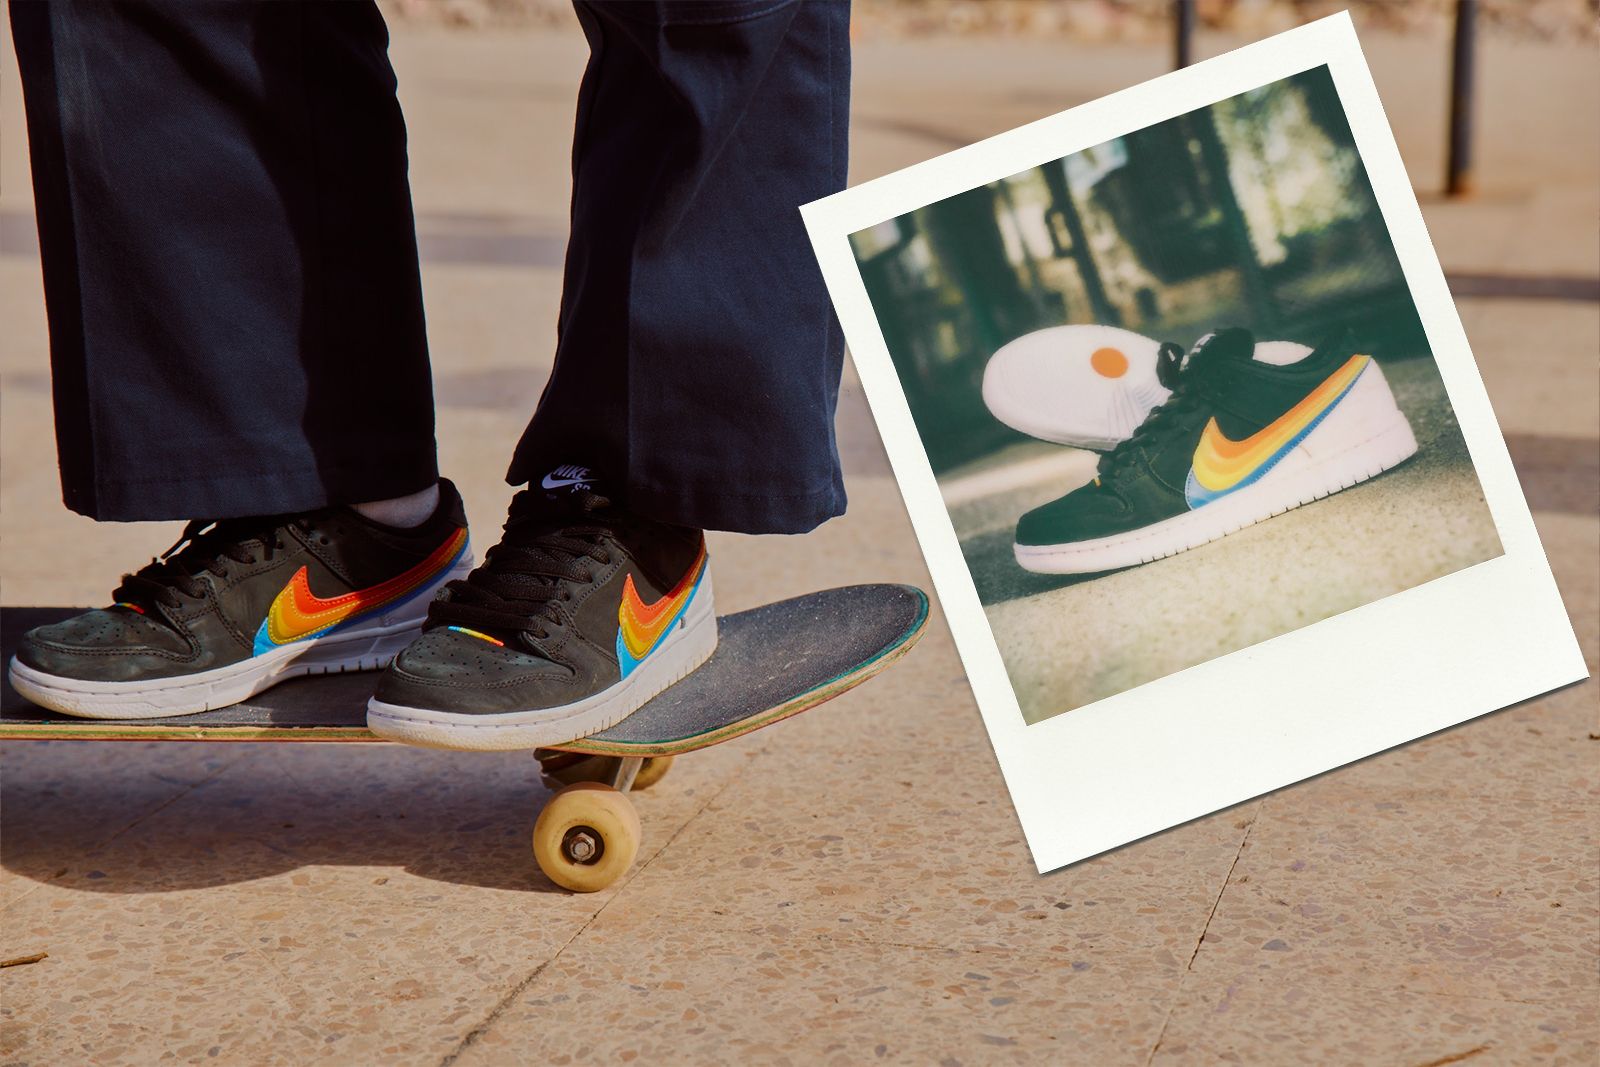 Polaroid and Nike SB team up for a lovely skating shoe photo 1